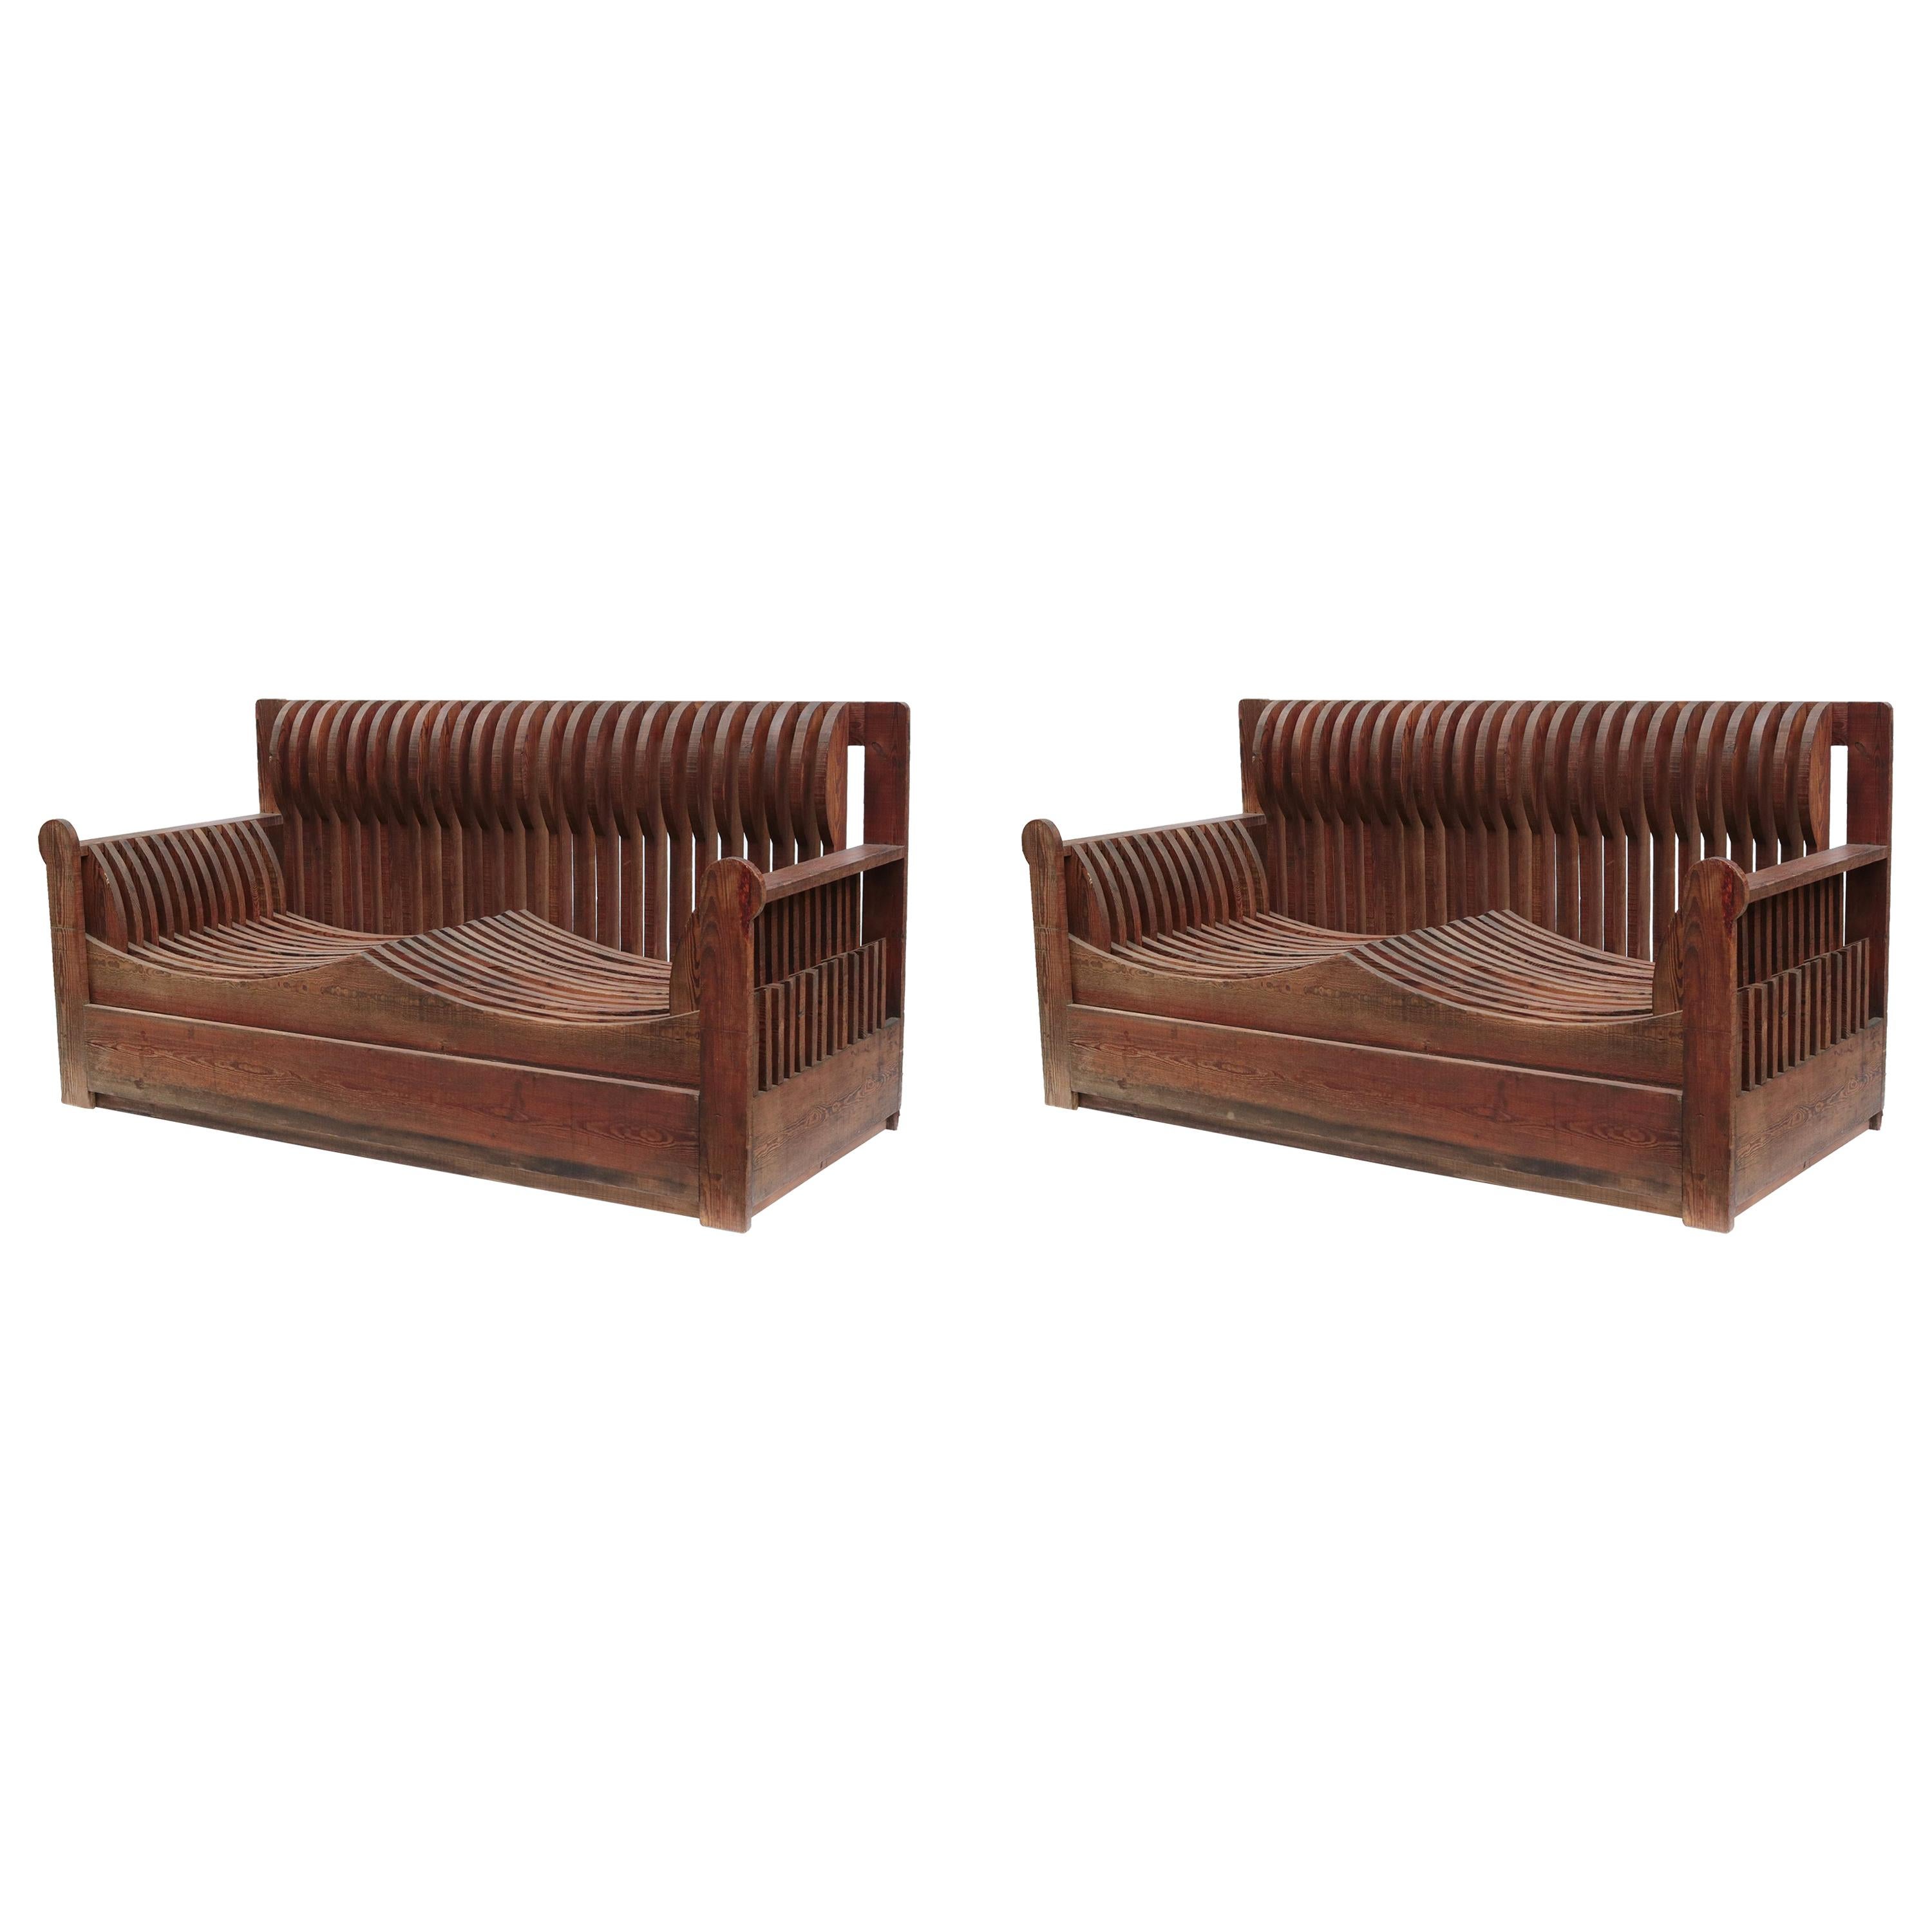 Pair of Two Seater Sofas by Mario Ceroli for Poltronova For Sale